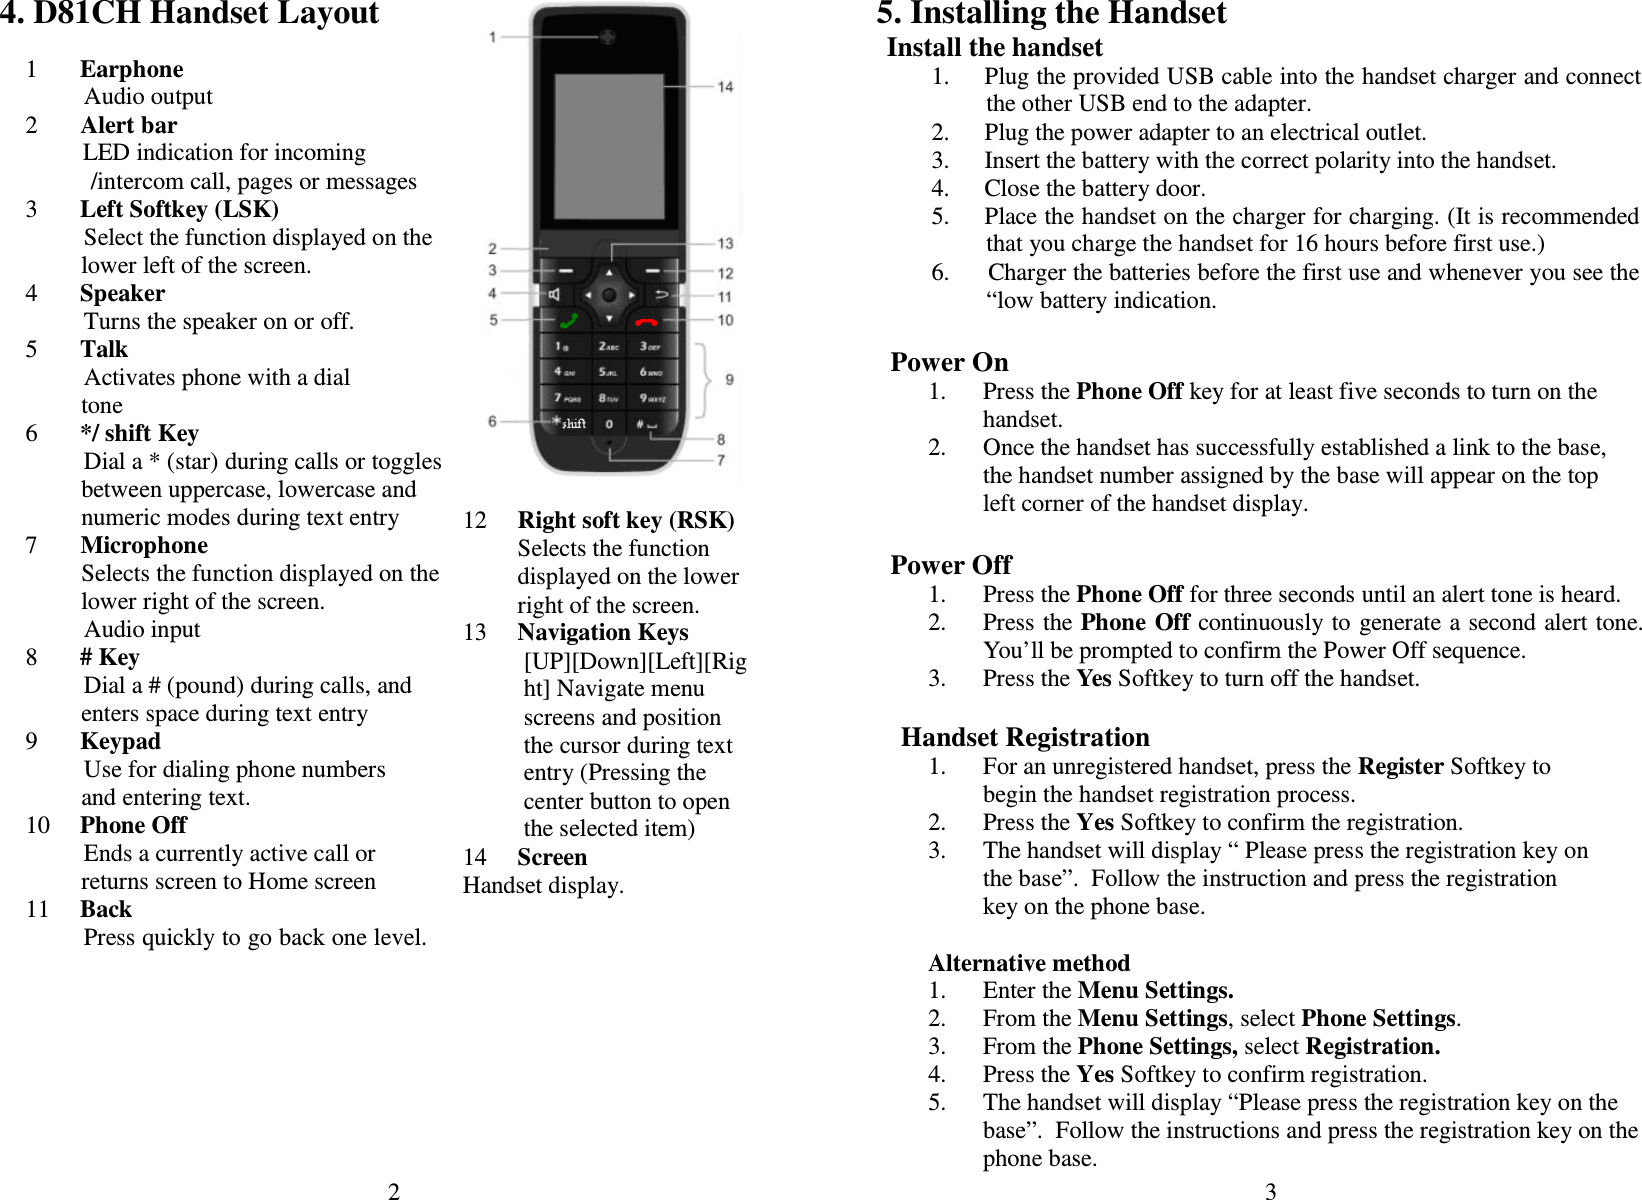 2  4. D81CH Handset Layout  1   Earphone Audio output 2       Alert bar                 LED indication for incoming /intercom call, pages or messages 3   Left Softkey (LSK) Select the function displayed on the lower left of the screen. 4   Speaker Turns the speaker on or off. 5   Talk Activates phone with a dial tone 6   */ shift Key Dial a * (star) during calls or toggles between uppercase, lowercase and numeric modes during text entry   7       Microphone Selects the function displayed on the lower right of the screen. Audio input 8   # Key Dial a # (pound) during calls, and enters space during text entry 9   Keypad Use for dialing phone numbers and entering text. 10   Phone Off Ends a currently active call or returns screen to Home screen 11   Back Press quickly to go back one level.         12     Right soft key (RSK) Selects the function displayed on the lower right of the screen. 13   Navigation Keys [UP][Down][Left][Right] Navigate menu screens and position the cursor during text entry (Pressing the center button to open the selected item) 14   Screen Handset display. 3  5. Installing the Handset Install the handset 1.  Plug the provided USB cable into the handset charger and connect the other USB end to the adapter. 2.  Plug the power adapter to an electrical outlet.  3.  Insert the battery with the correct polarity into the handset. 4.  Close the battery door. 5.  Place the handset on the charger for charging. (It is recommended that you charge the handset for 16 hours before first use.) 6.      Charger the batteries before the first use and whenever you see the “low battery indication.   Power On 1. Press the Phone Off key for at least five seconds to turn on the handset. 2. Once the handset has successfully established a link to the base, the handset number assigned by the base will appear on the top left corner of the handset display.  Power Off 1. Press the Phone Off for three seconds until an alert tone is heard. 2. Press the Phone  Off continuously to  generate a second alert tone. You’ll be prompted to confirm the Power Off sequence. 3. Press the Yes Softkey to turn off the handset.  Handset Registration 1. For an unregistered handset, press the Register Softkey to begin the handset registration process. 2. Press the Yes Softkey to confirm the registration. 3. The handset will display “ Please press the registration key on the base”.  Follow the instruction and press the registration key on the phone base.    Alternative method 1. Enter the Menu Settings. 2. From the Menu Settings, select Phone Settings. 3. From the Phone Settings, select Registration.  4. Press the Yes Softkey to confirm registration. 5. The handset will display “Please press the registration key on the base”.  Follow the instructions and press the registration key on the phone base. 